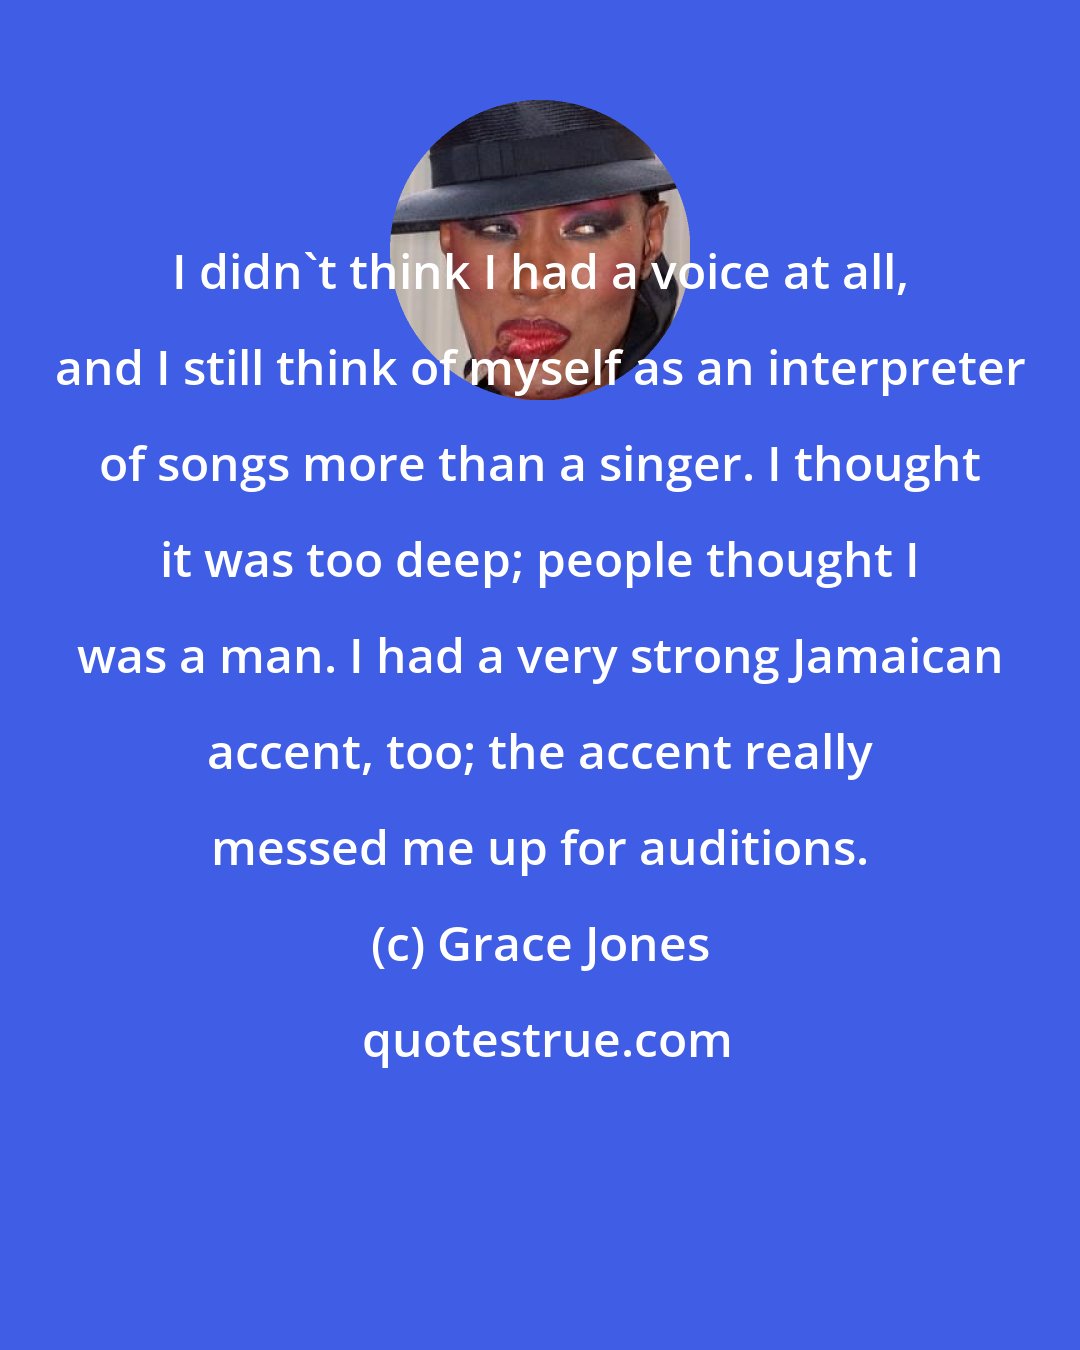 Grace Jones: I didn't think I had a voice at all, and I still think of myself as an interpreter of songs more than a singer. I thought it was too deep; people thought I was a man. I had a very strong Jamaican accent, too; the accent really messed me up for auditions.